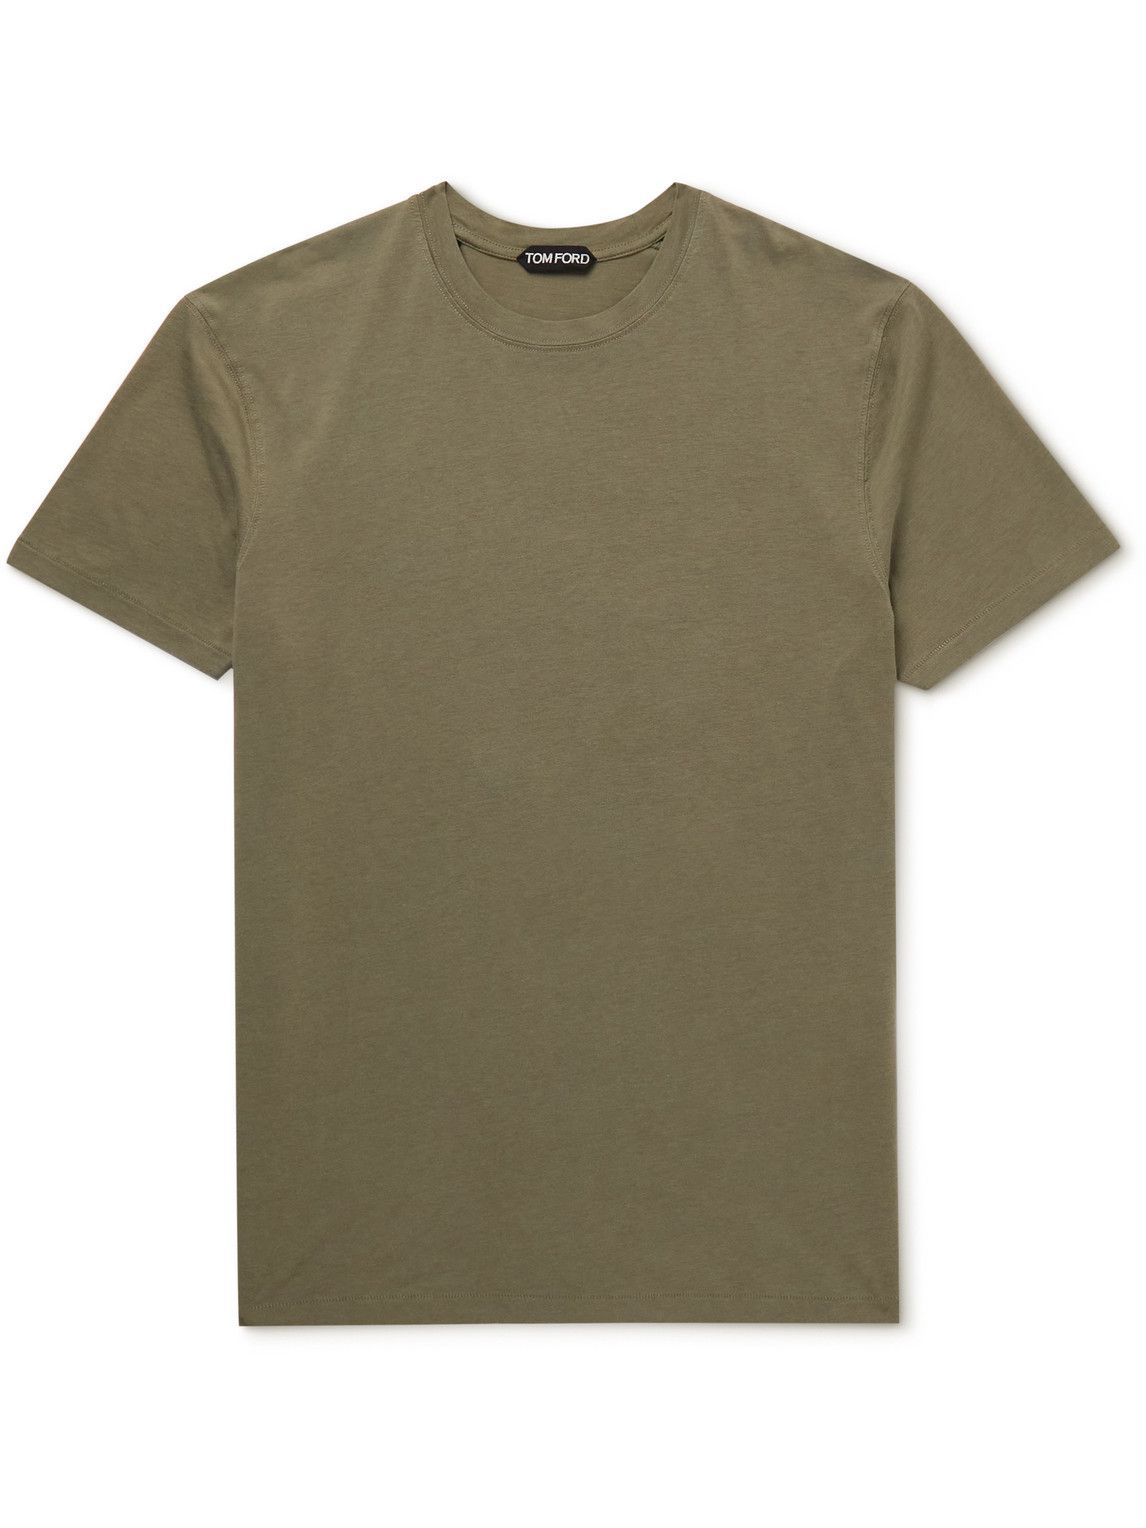 TOM FORD - Lyocell and Cotton-Blend Jersey T-Shirt - Green TOM FORD